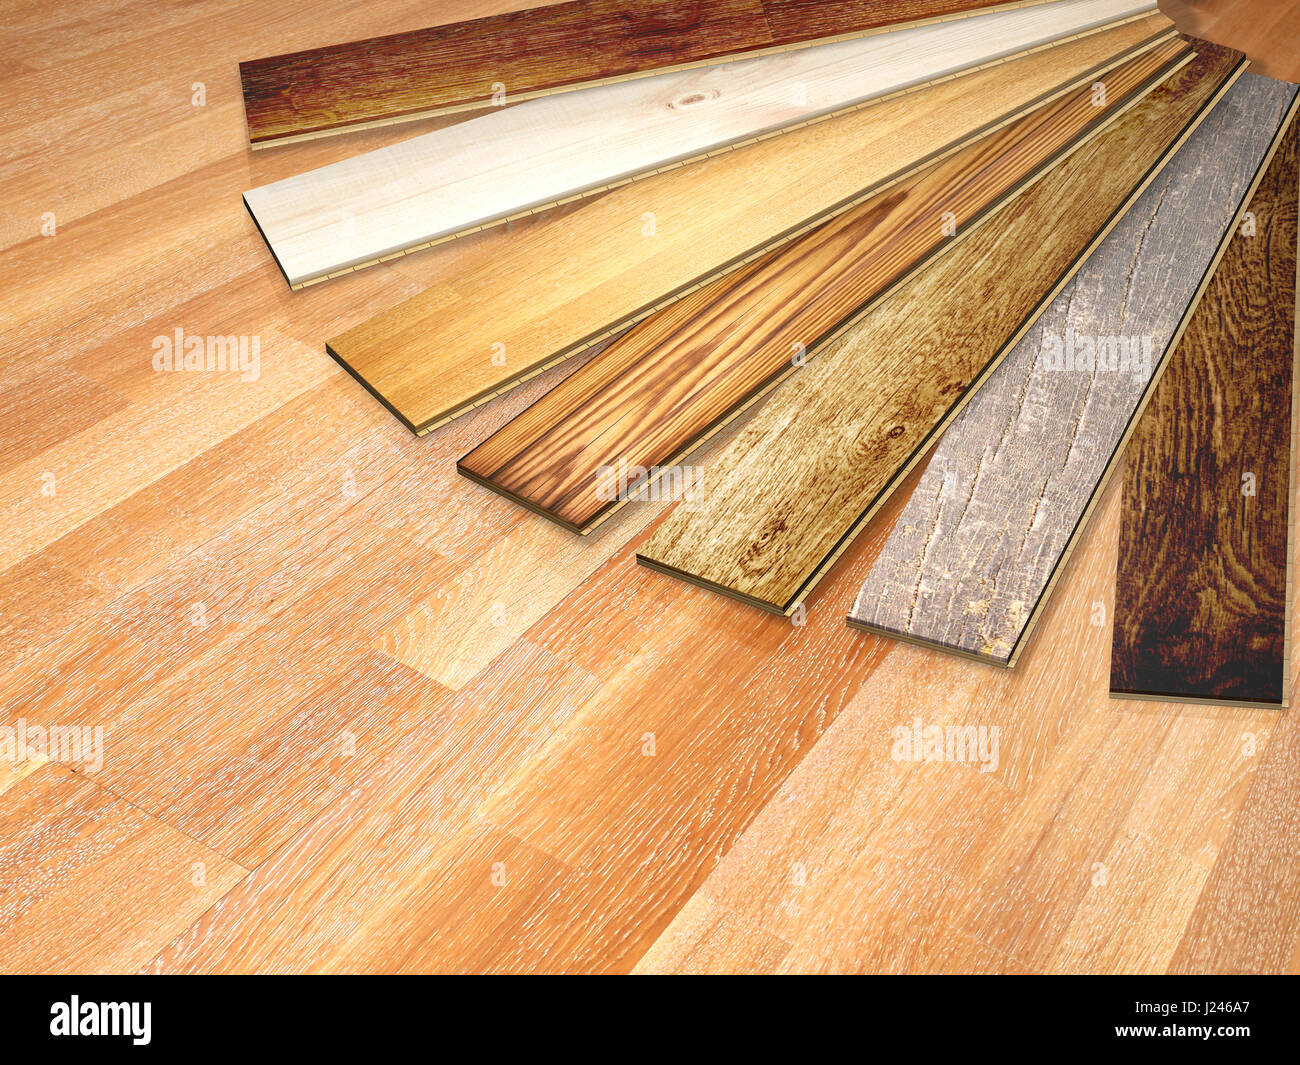 New Planks Of Oak Parquet Of Different Colors On Wooden Floor 3d